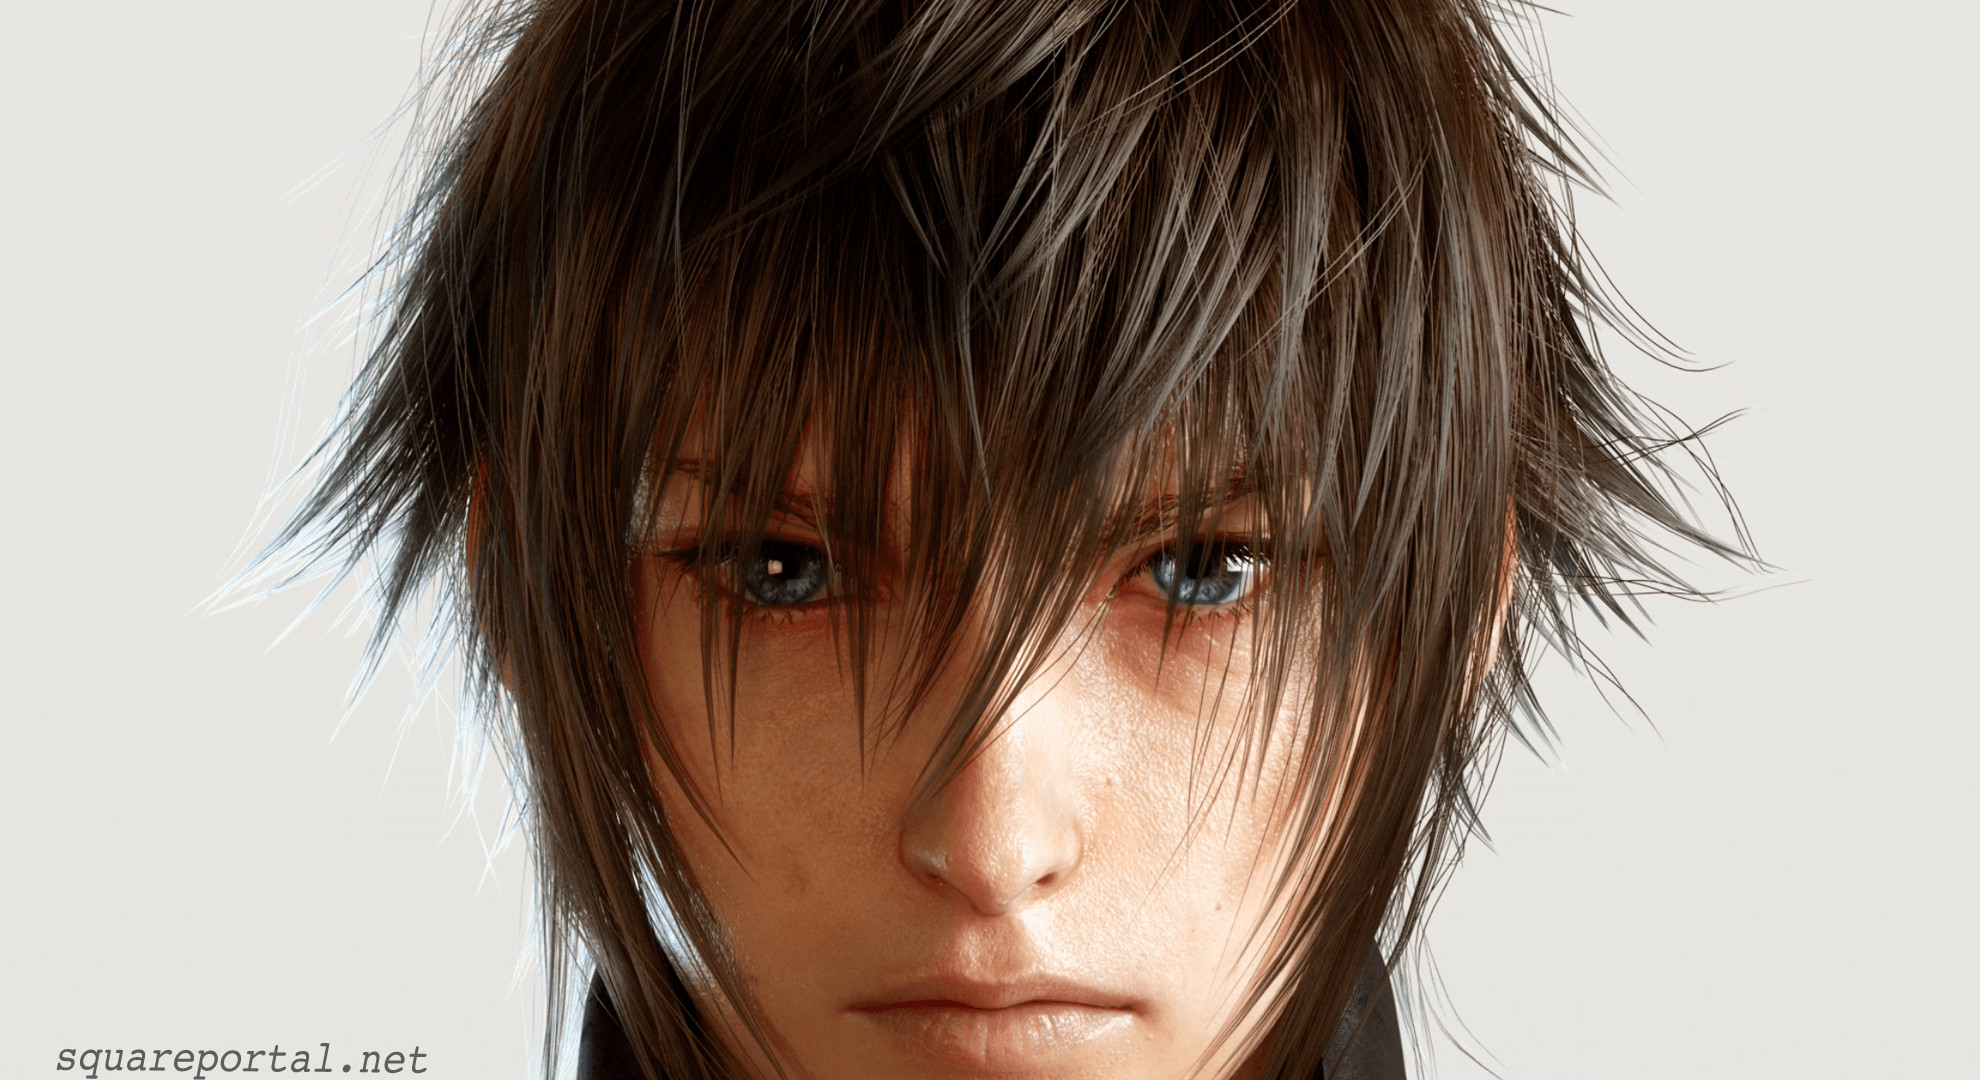 89 Final Fantasy XV HD Wallpapers Backgrounds – Wallpaper Abyss